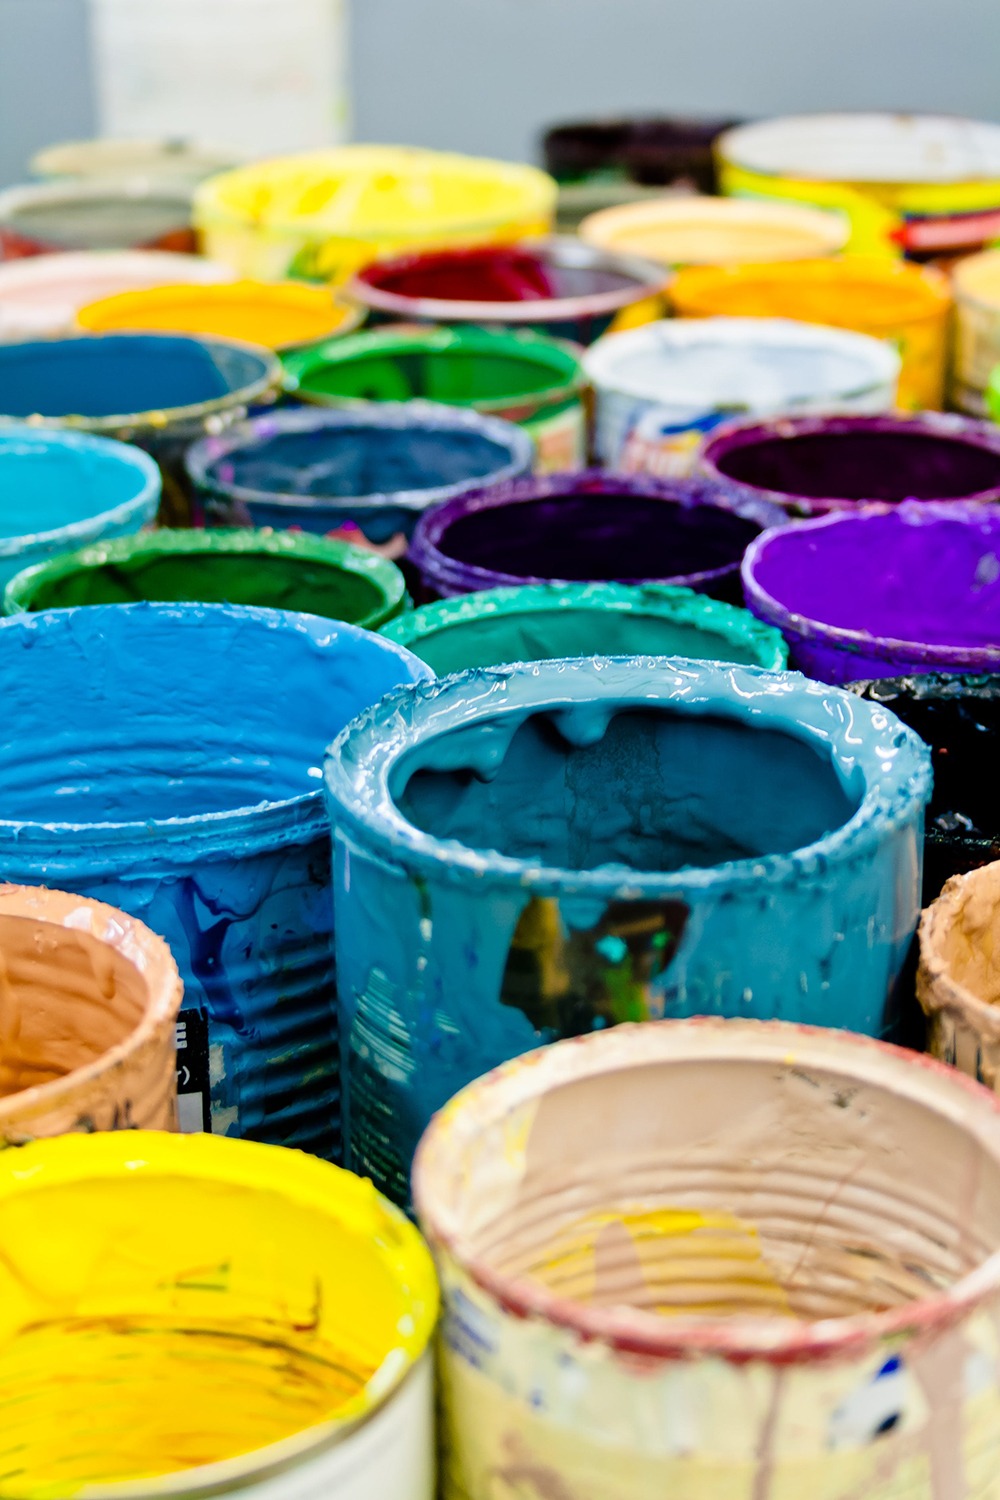 A variety of paint cans